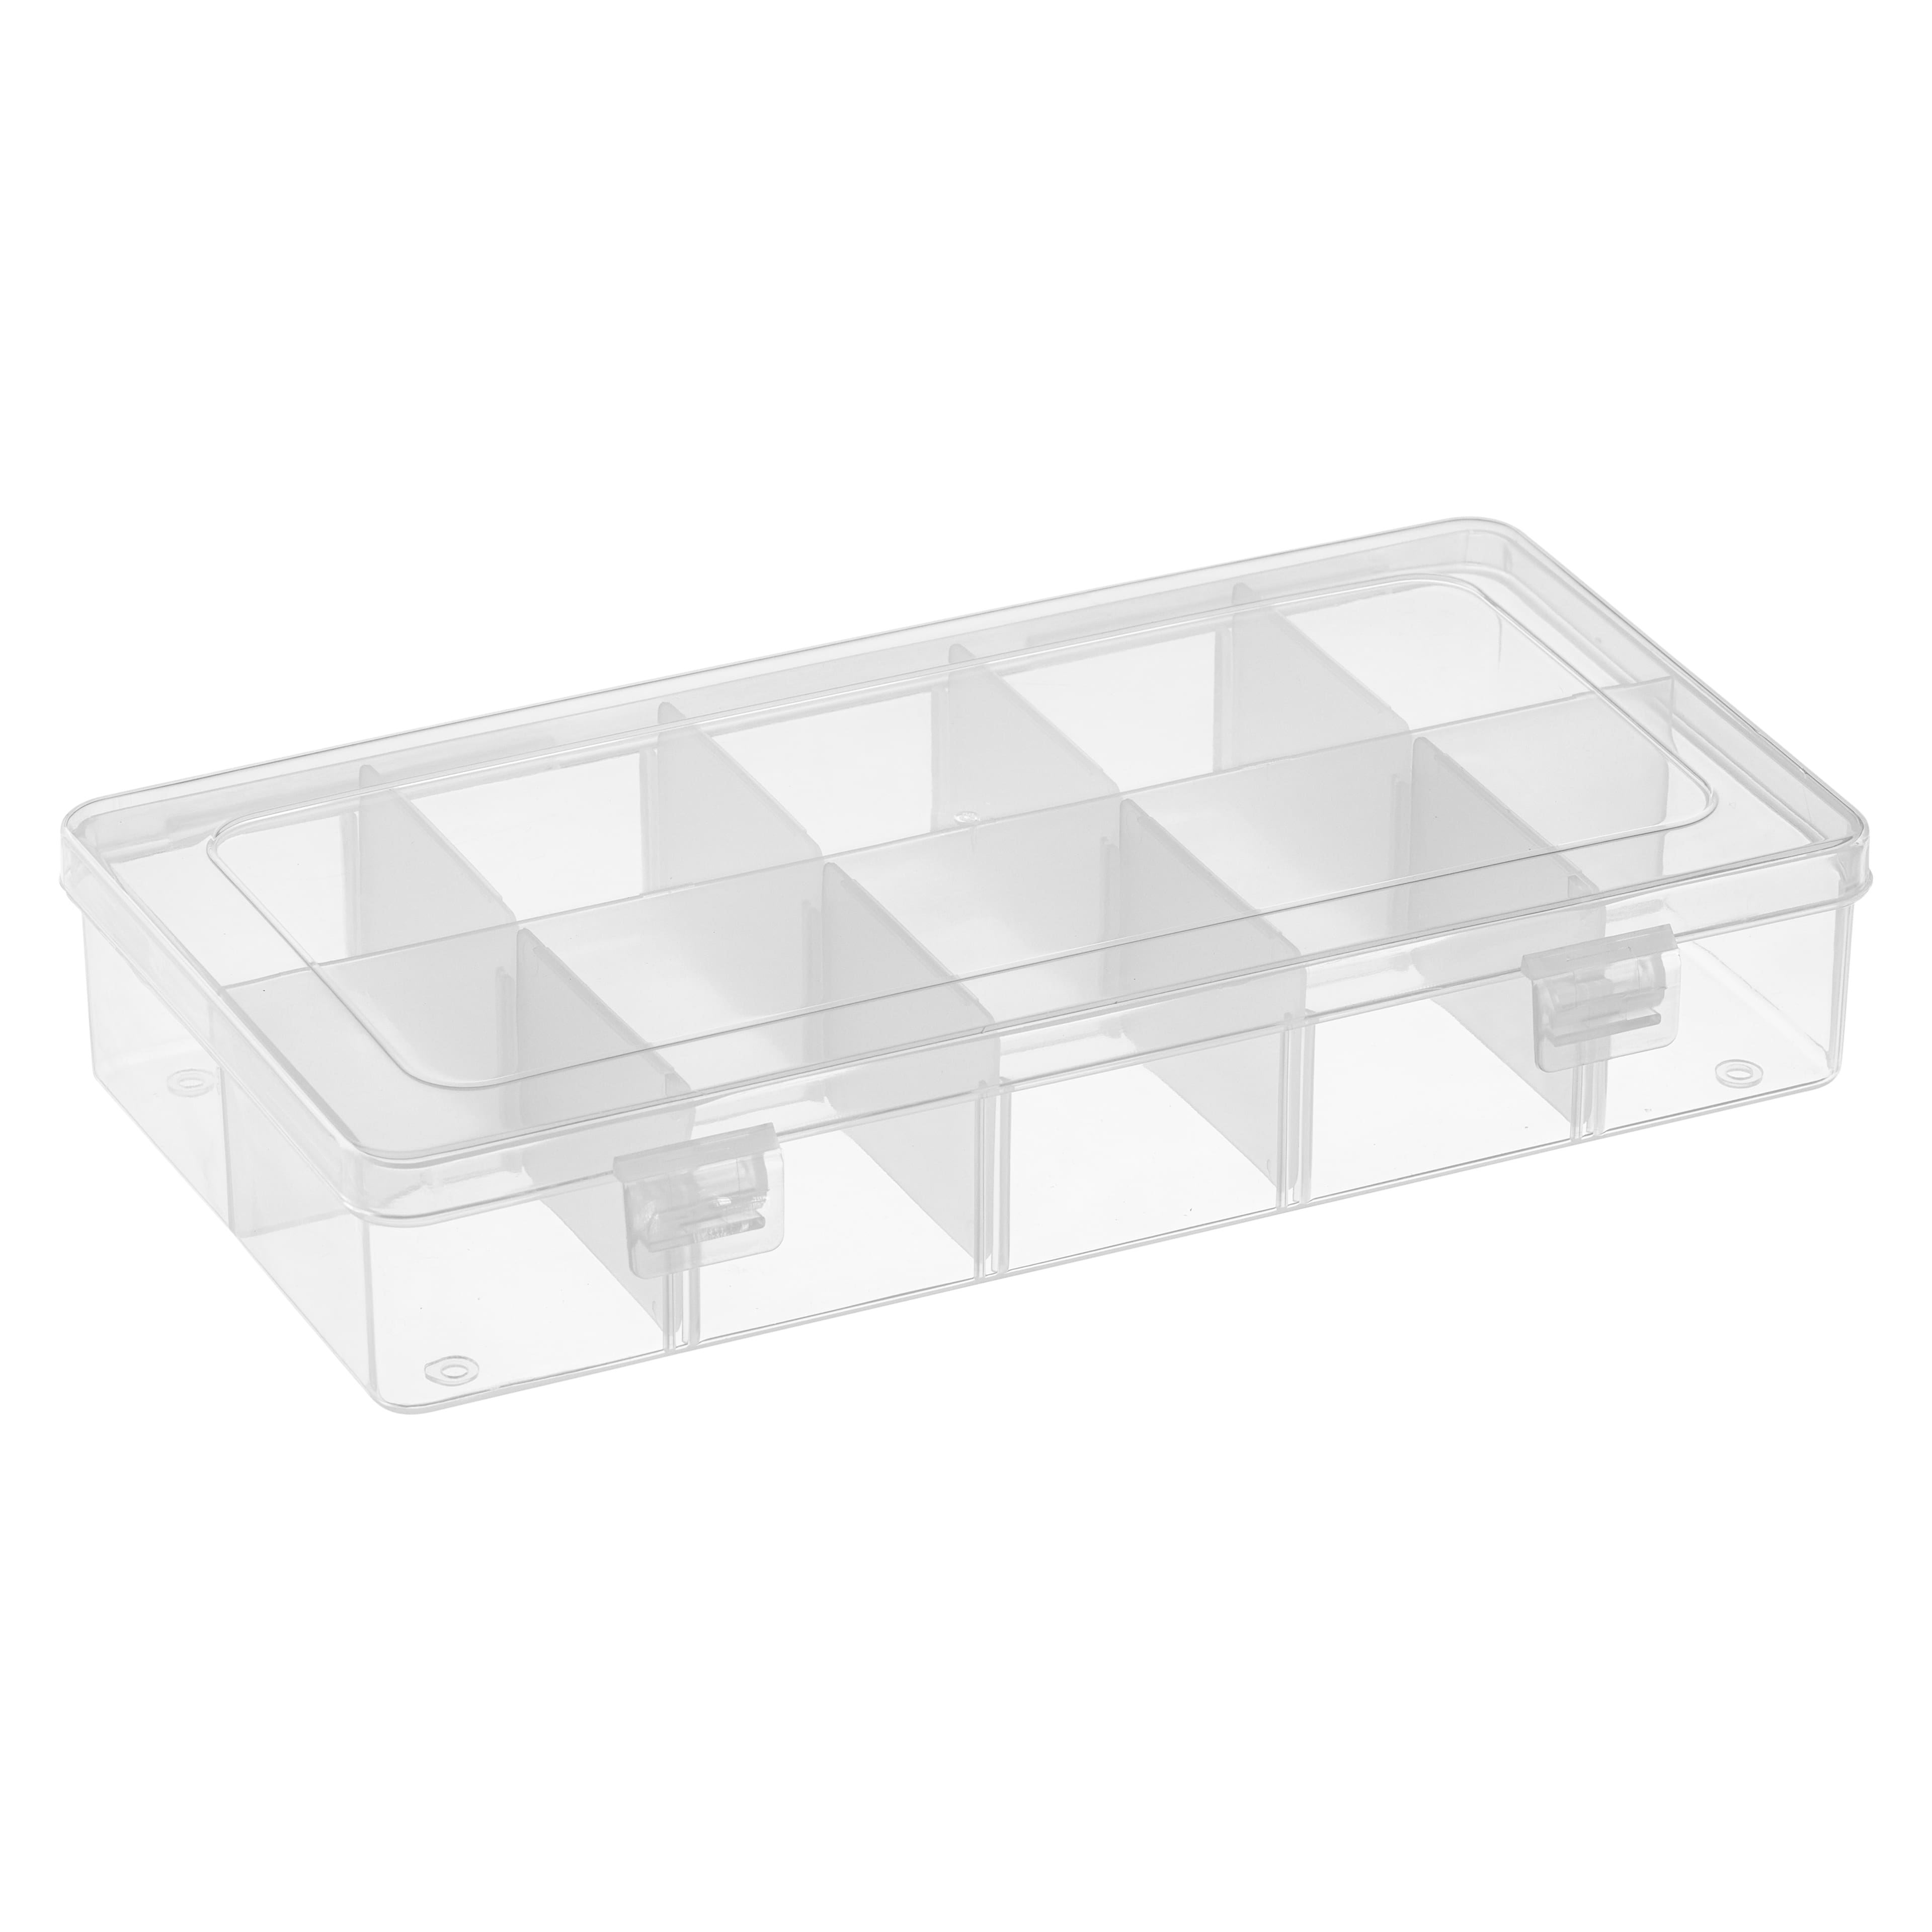 6 Pack: Bead Storage Box with Adjustable Compartments by Bead